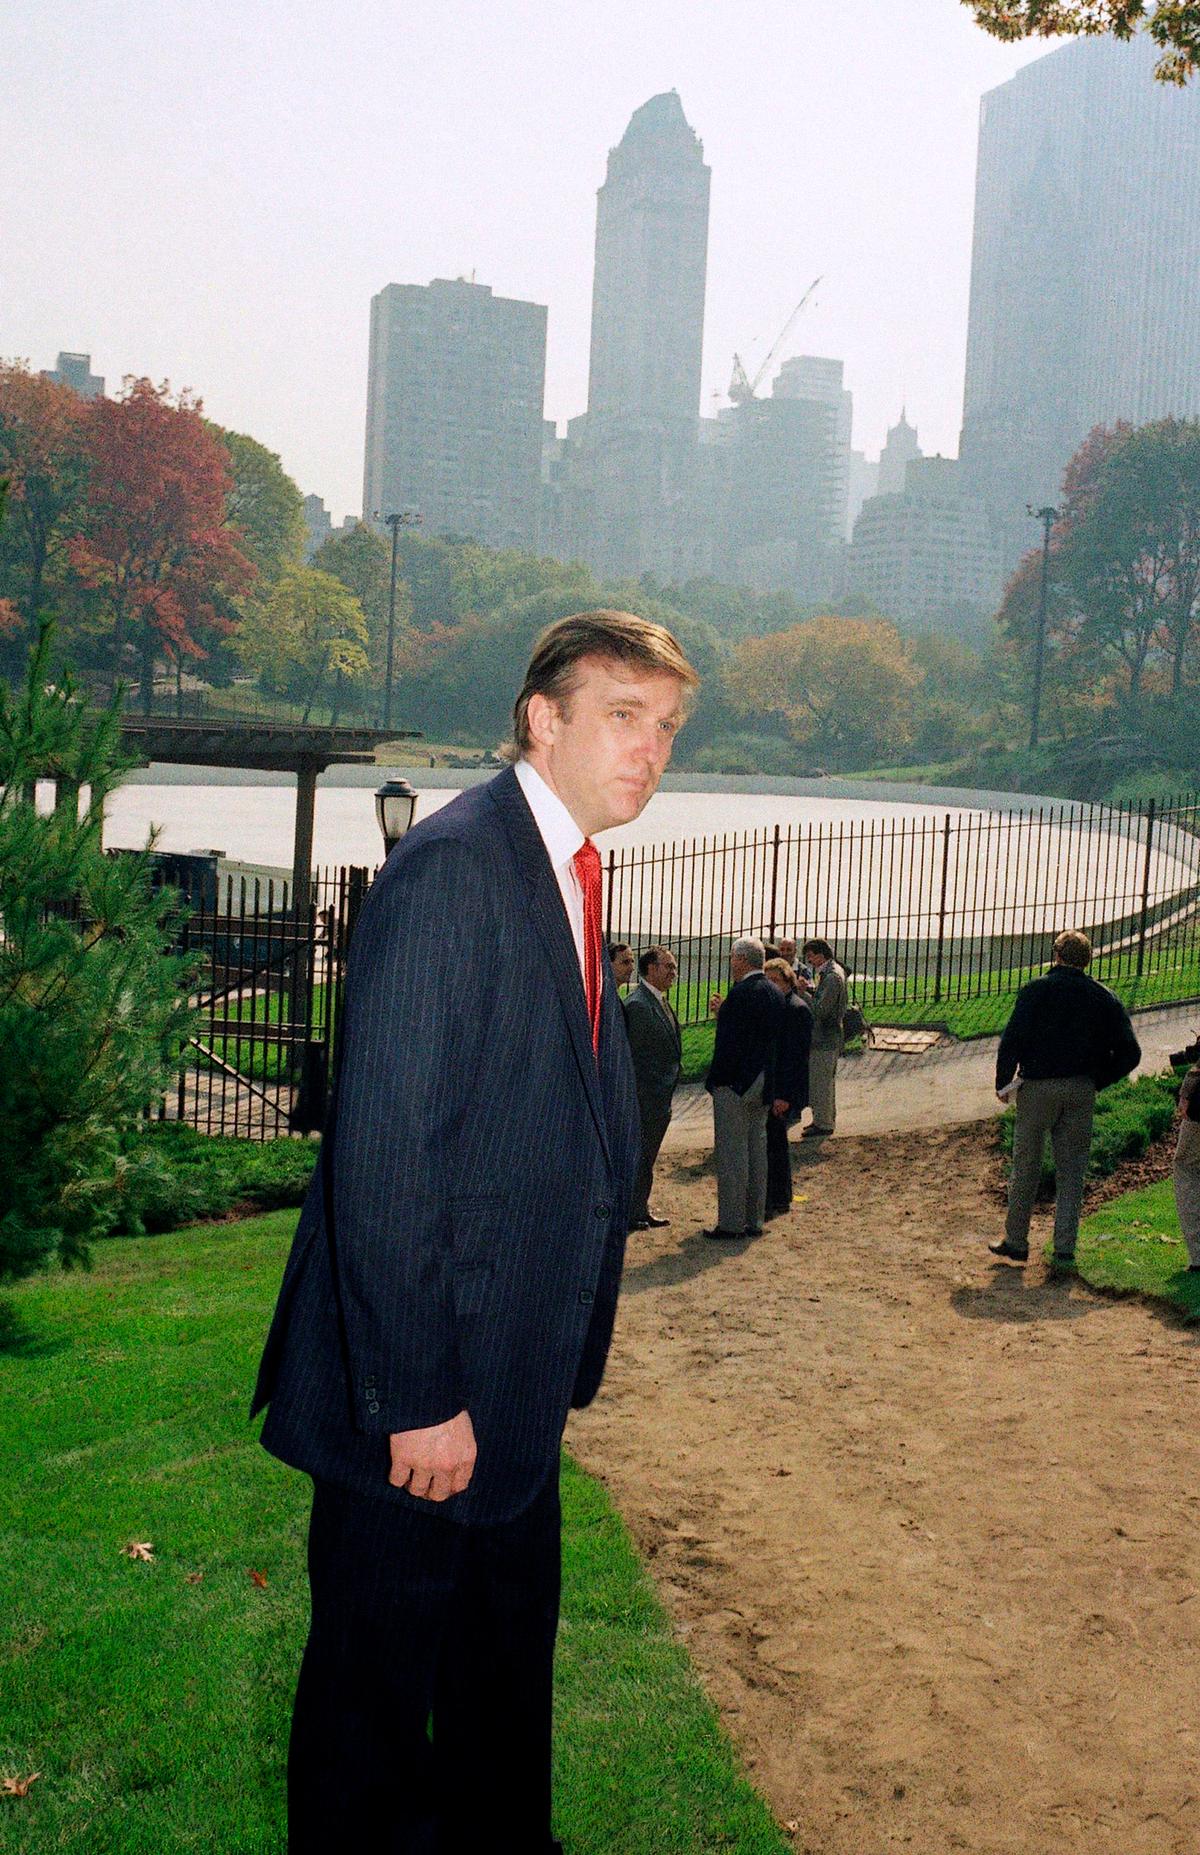  Donald Trump is photographed at Wollman Skating Rink which he offered to rebuild after the city's renovation effort had come to a standstill in New York on Oct. 23, 1986. (Mario Suriani/AP Photo)